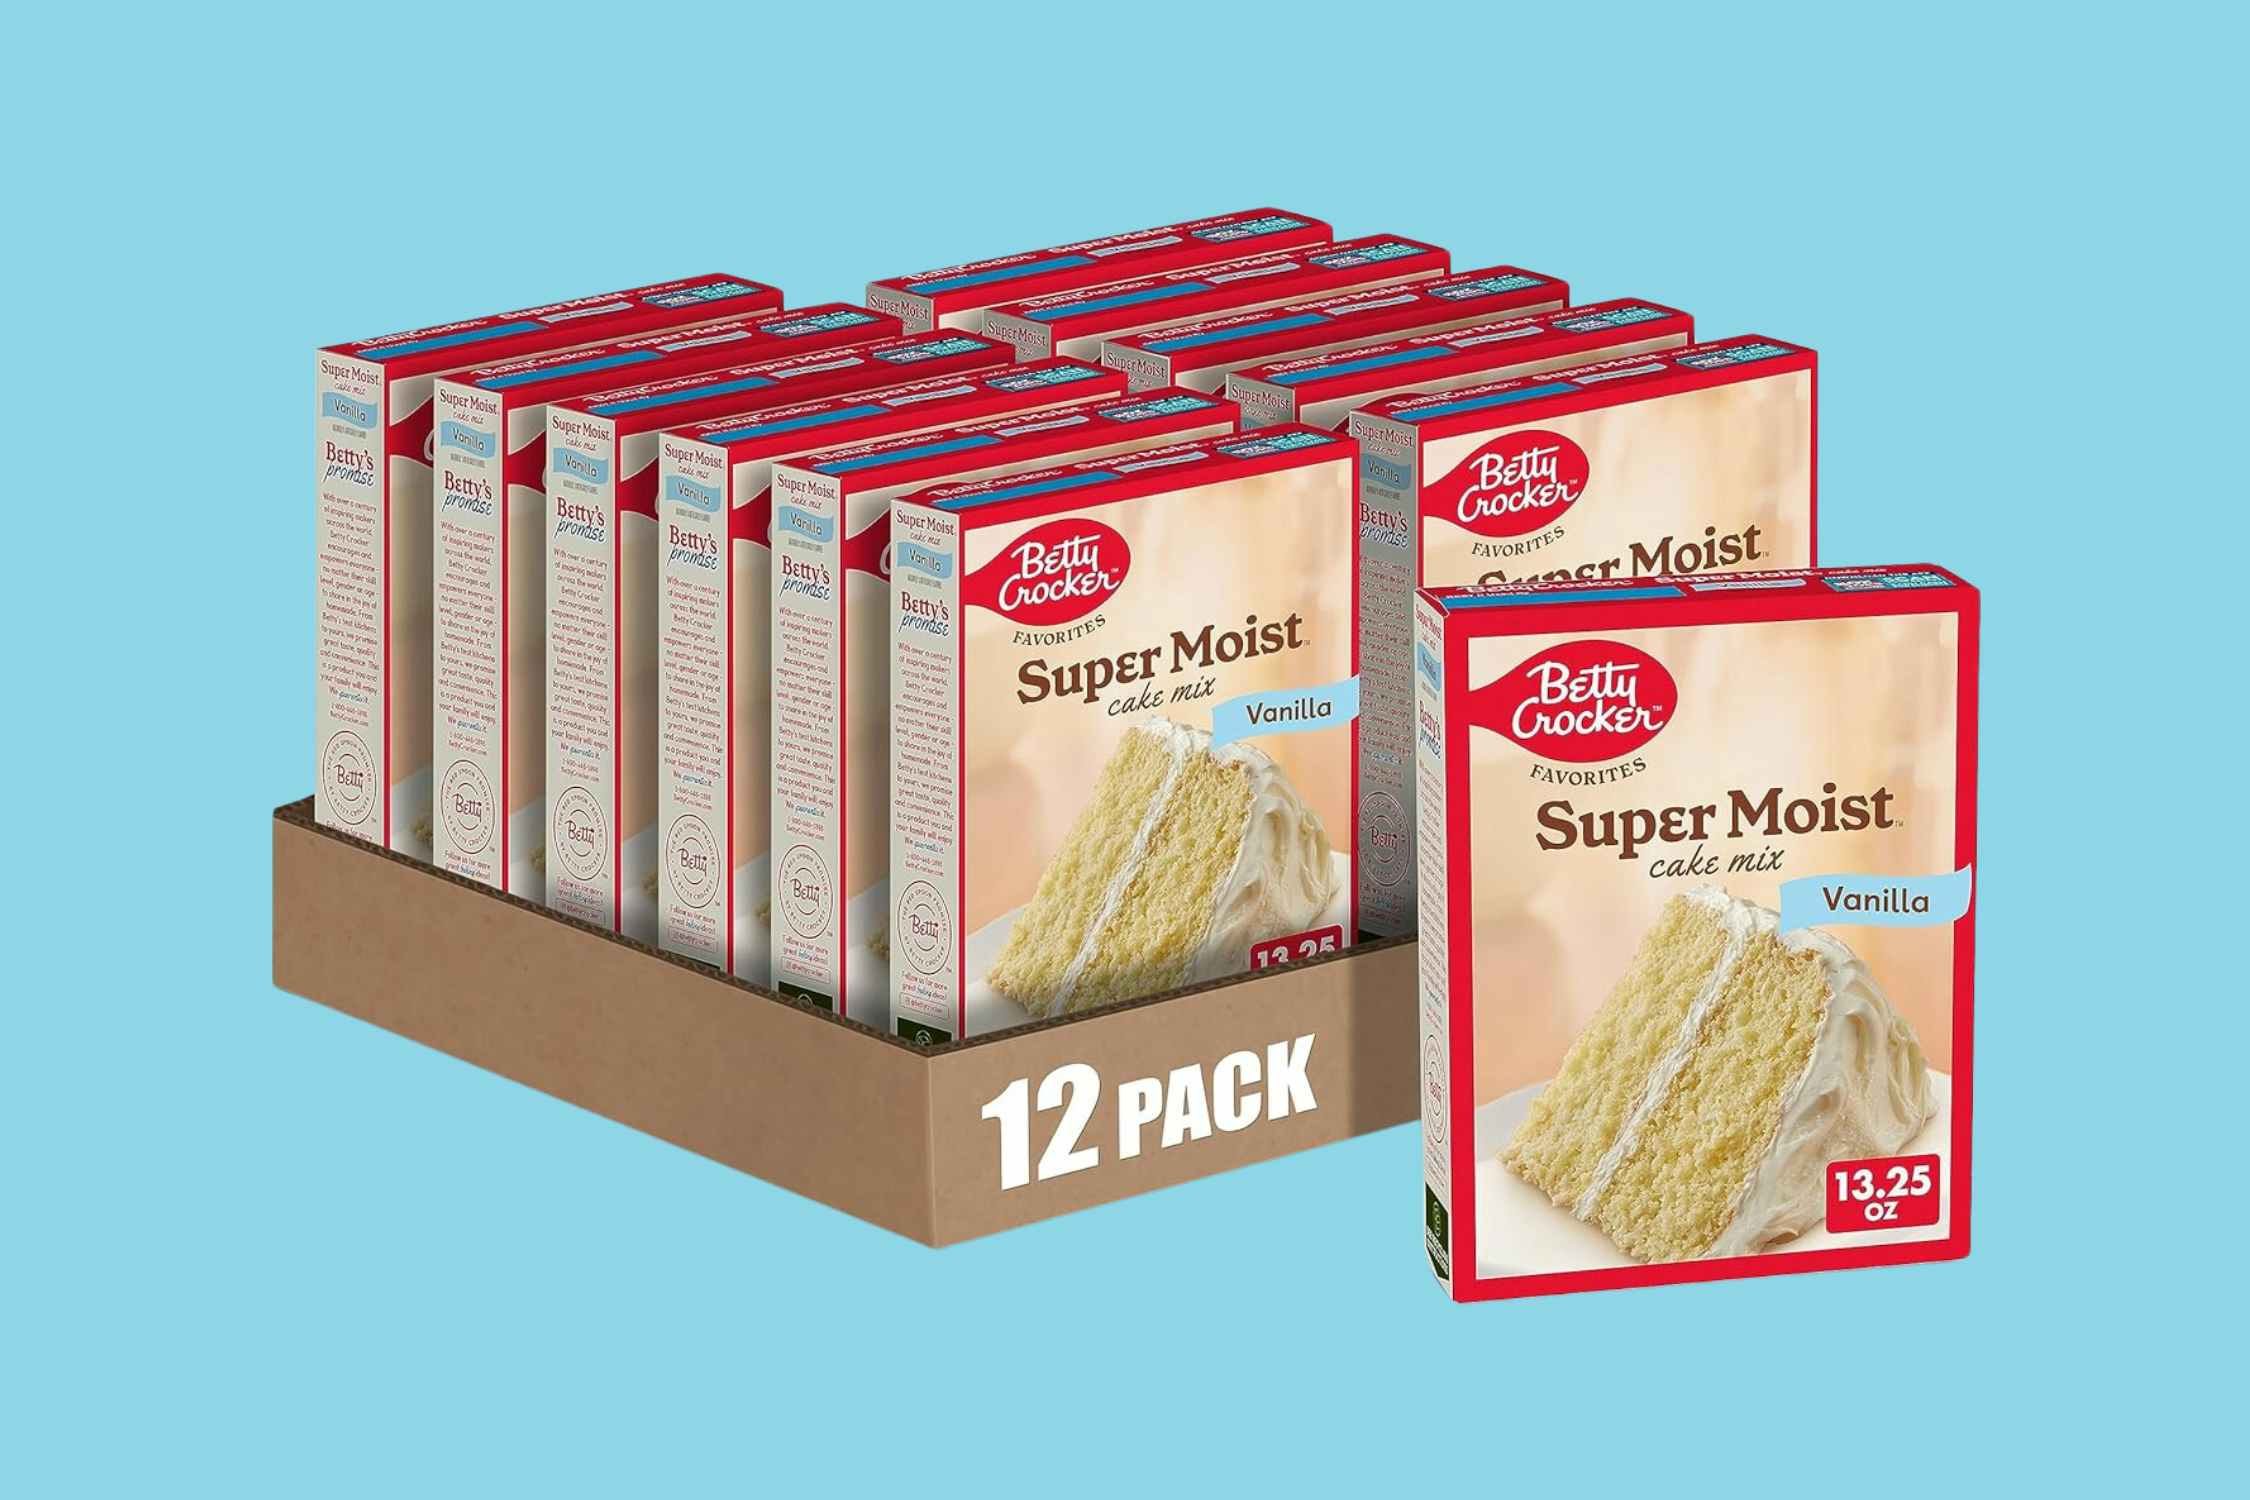 Betty Crocker Cake Mixes: Get 12 Boxes for $8.62 on Amazon ($0.72 Each)